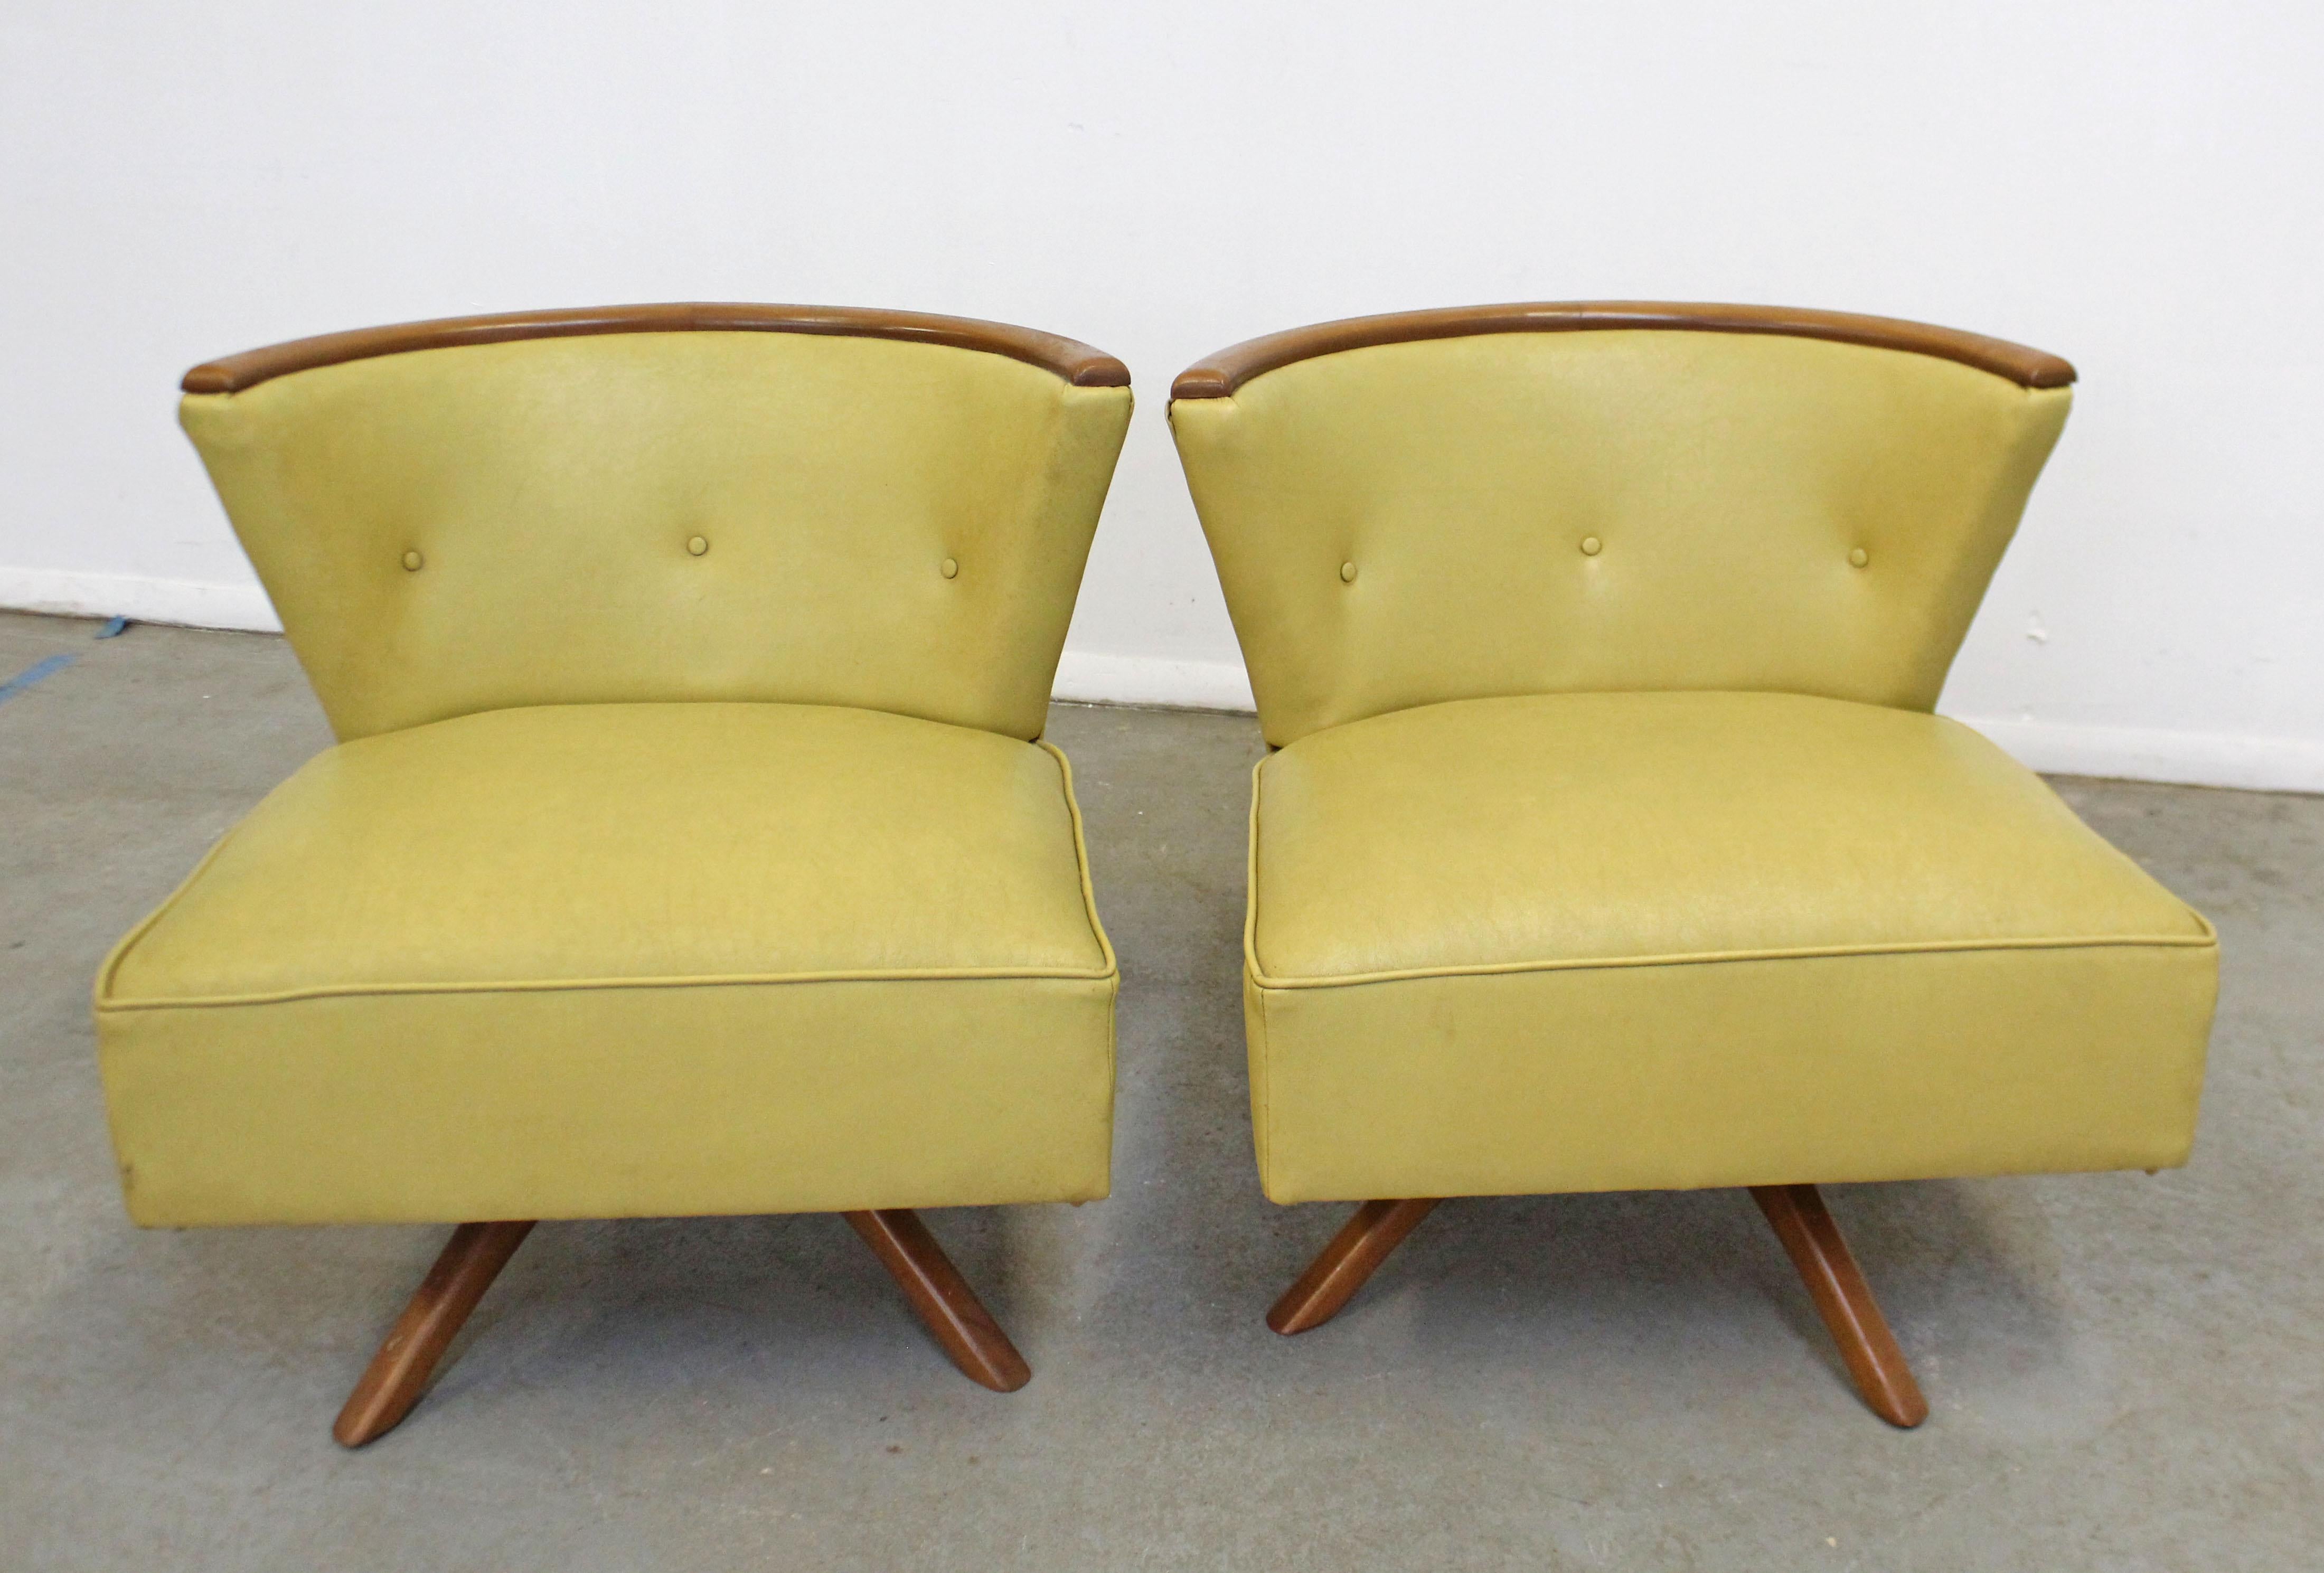 What a find. Offered is a pair of swivel slipper chairs attributed to Kroehler Smartset. They have vinyl upholstery and wooden bases, swivel mechanism is in working order. They are in structurally sound condition showing age wear (stains on